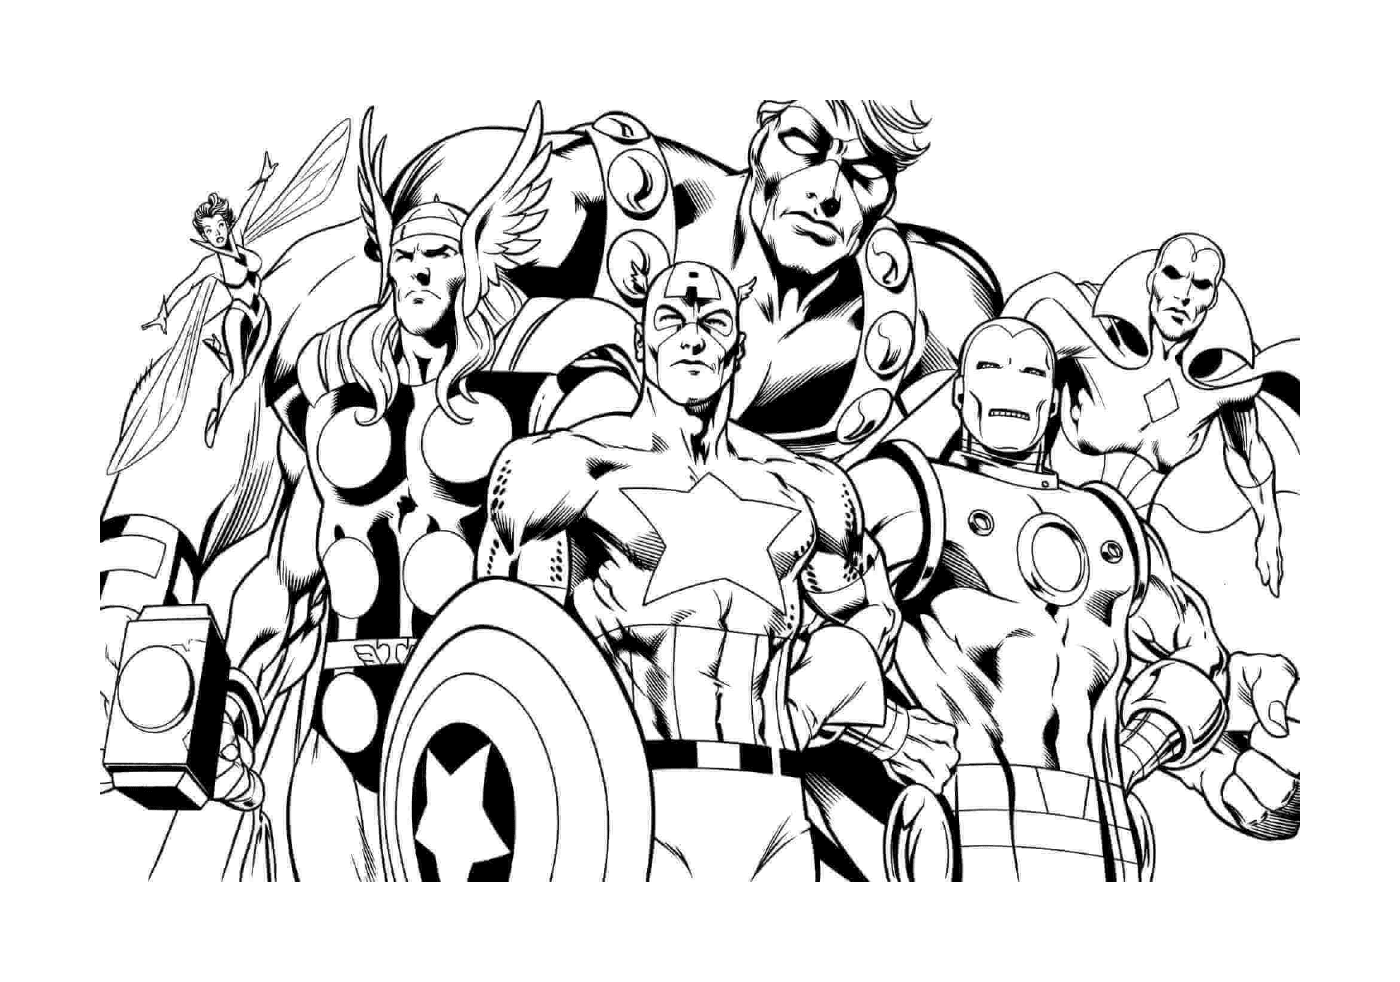  The Avengers, a group of heroes 